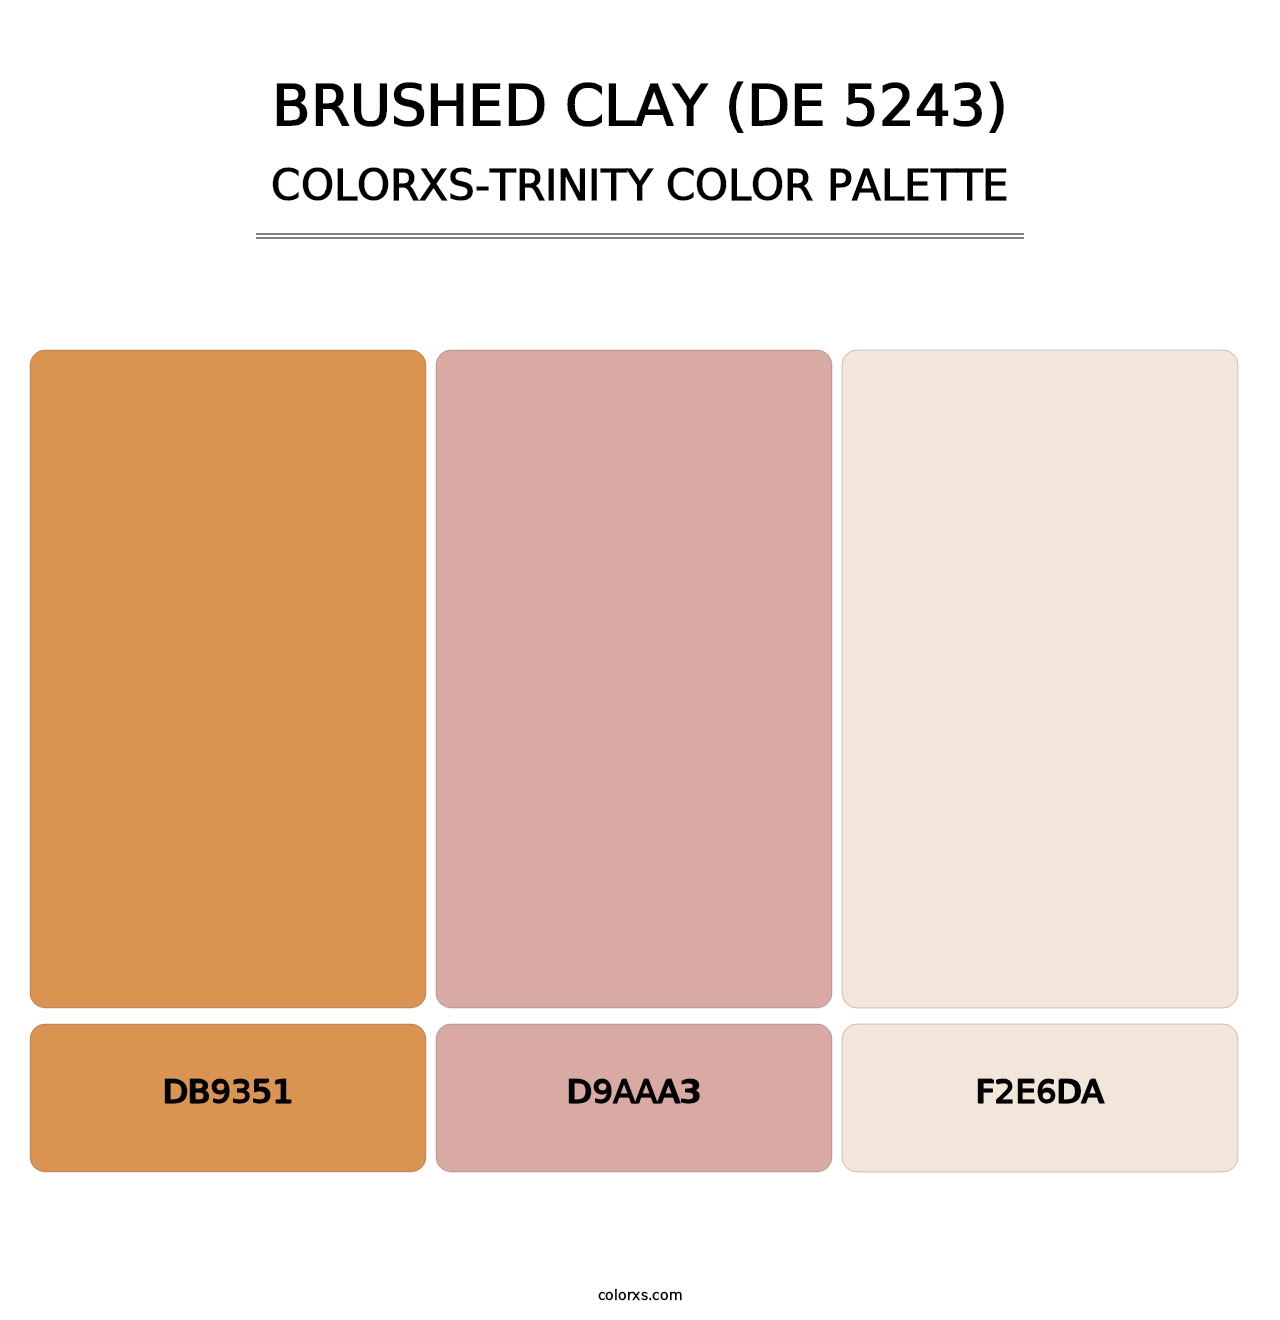 Brushed Clay (DE 5243) - Colorxs Trinity Palette